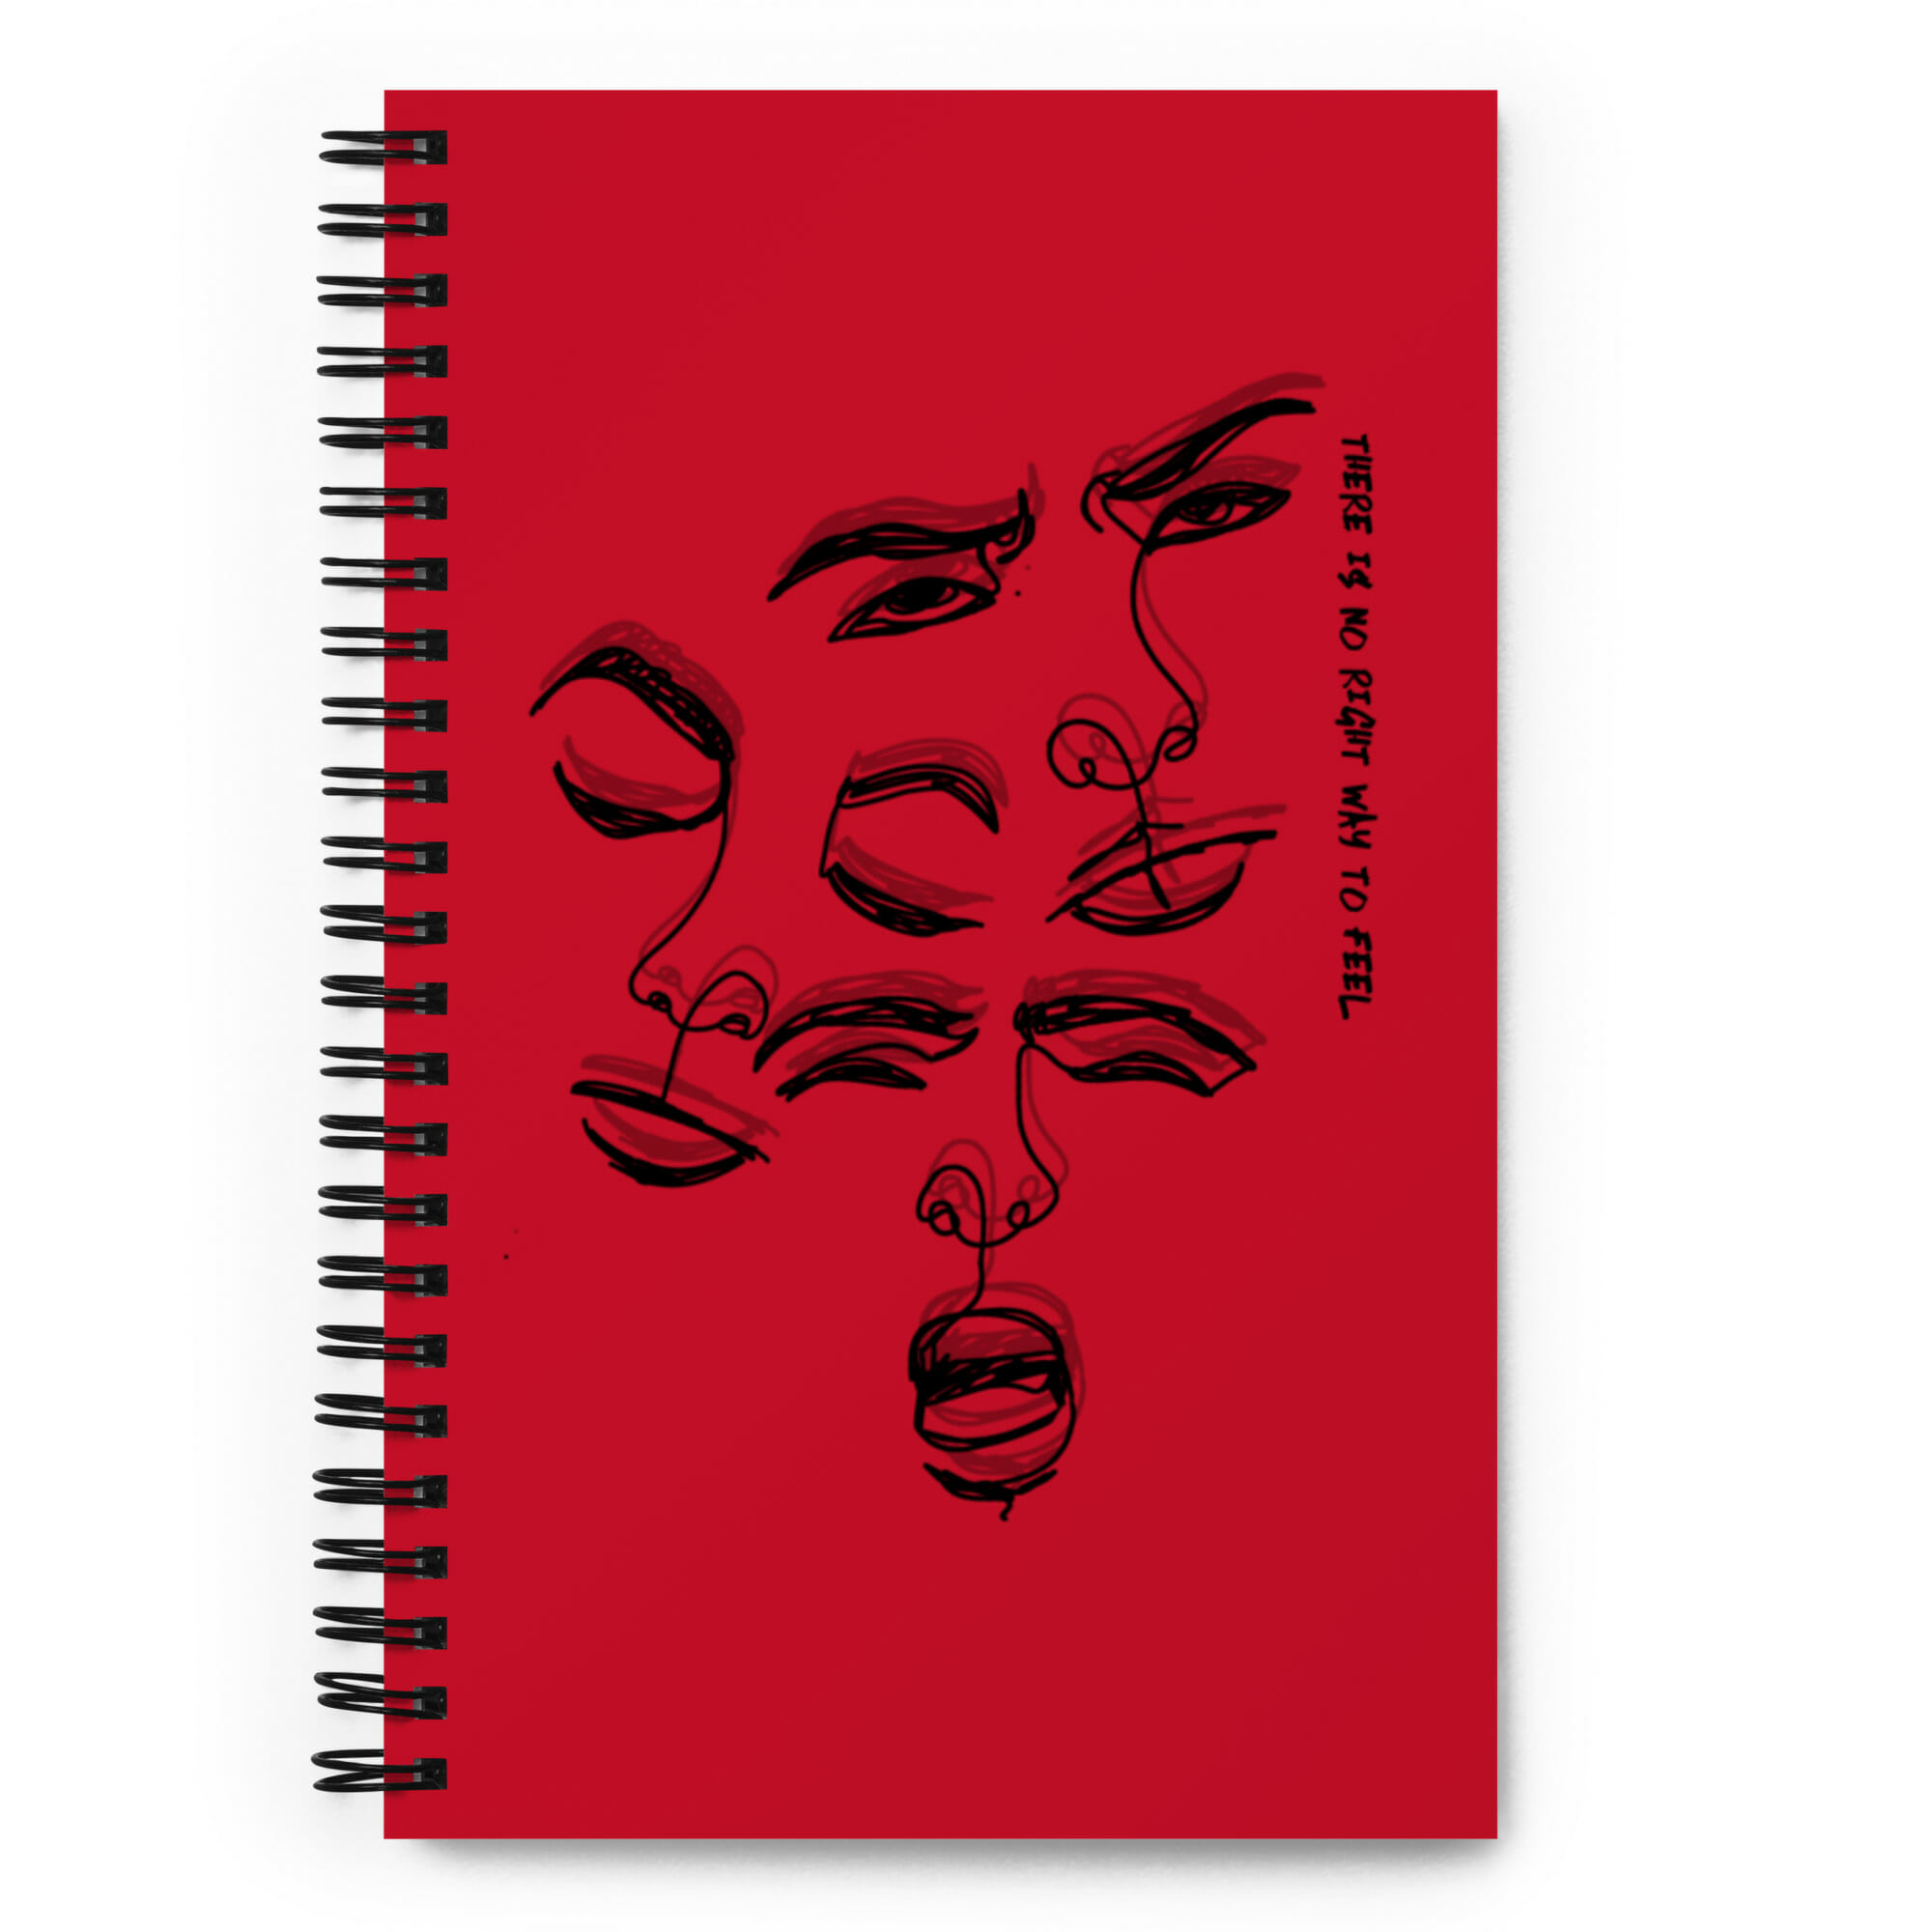 spiral-notebook-white-front-62a0900c2cfef.jpg